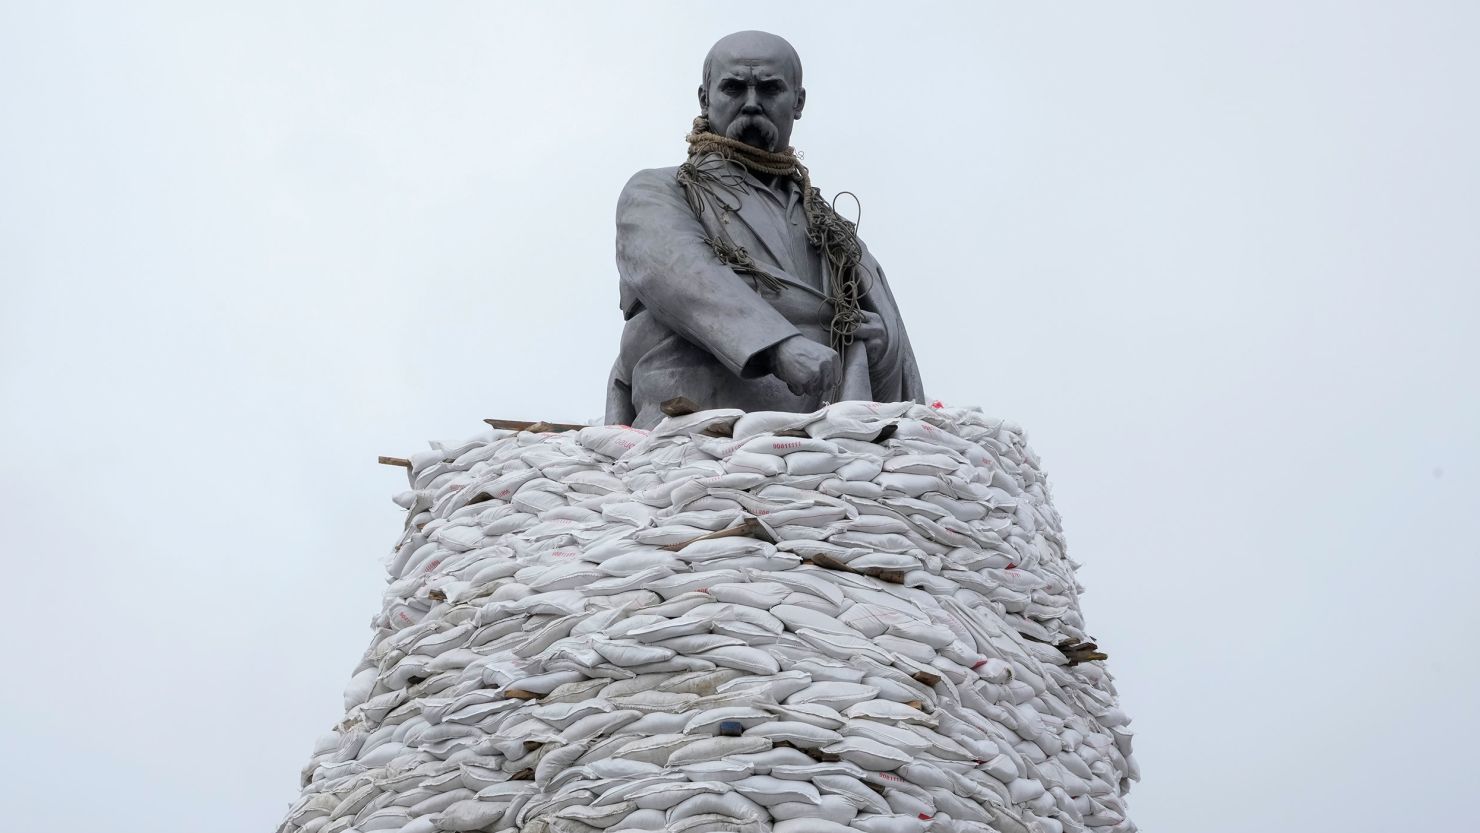 A statue of Ukrainian poet, Taras Shevchenko, is covered with bags to protect it from shelling in Kharkiv, pictured in March.